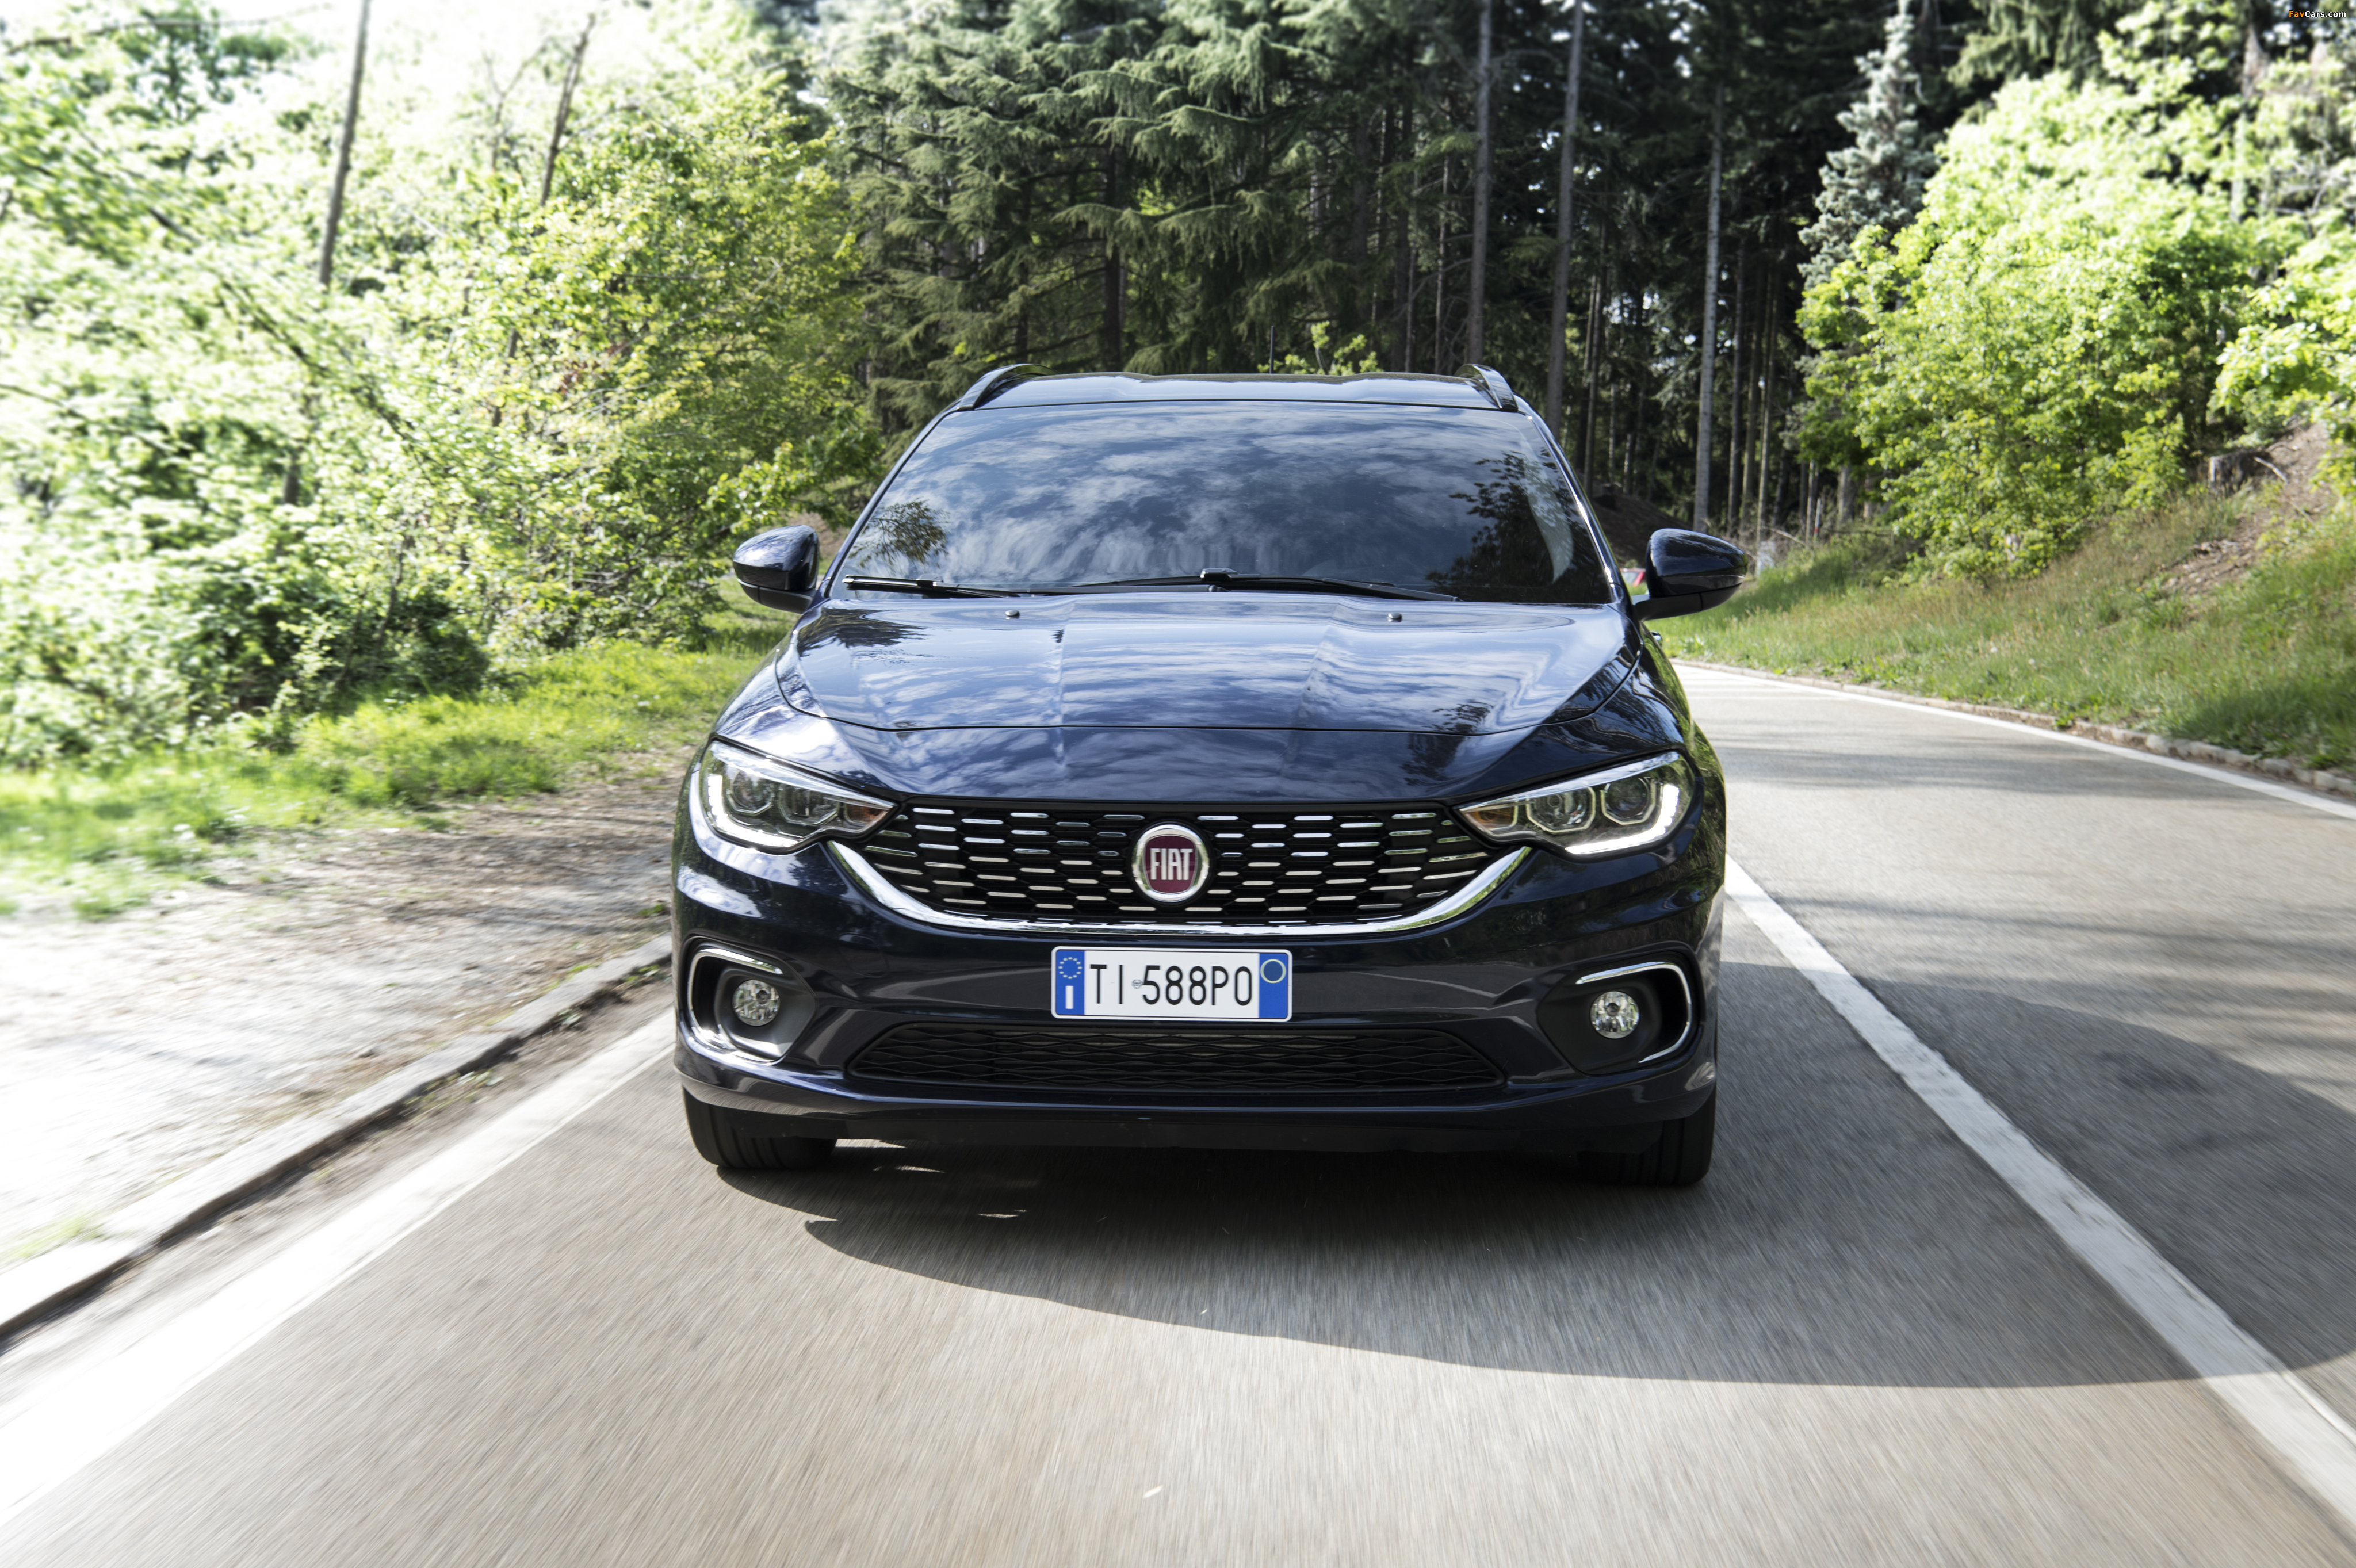 Fiat Tipo Station Wagon (357) 2016 pictures (4096 x 2726)